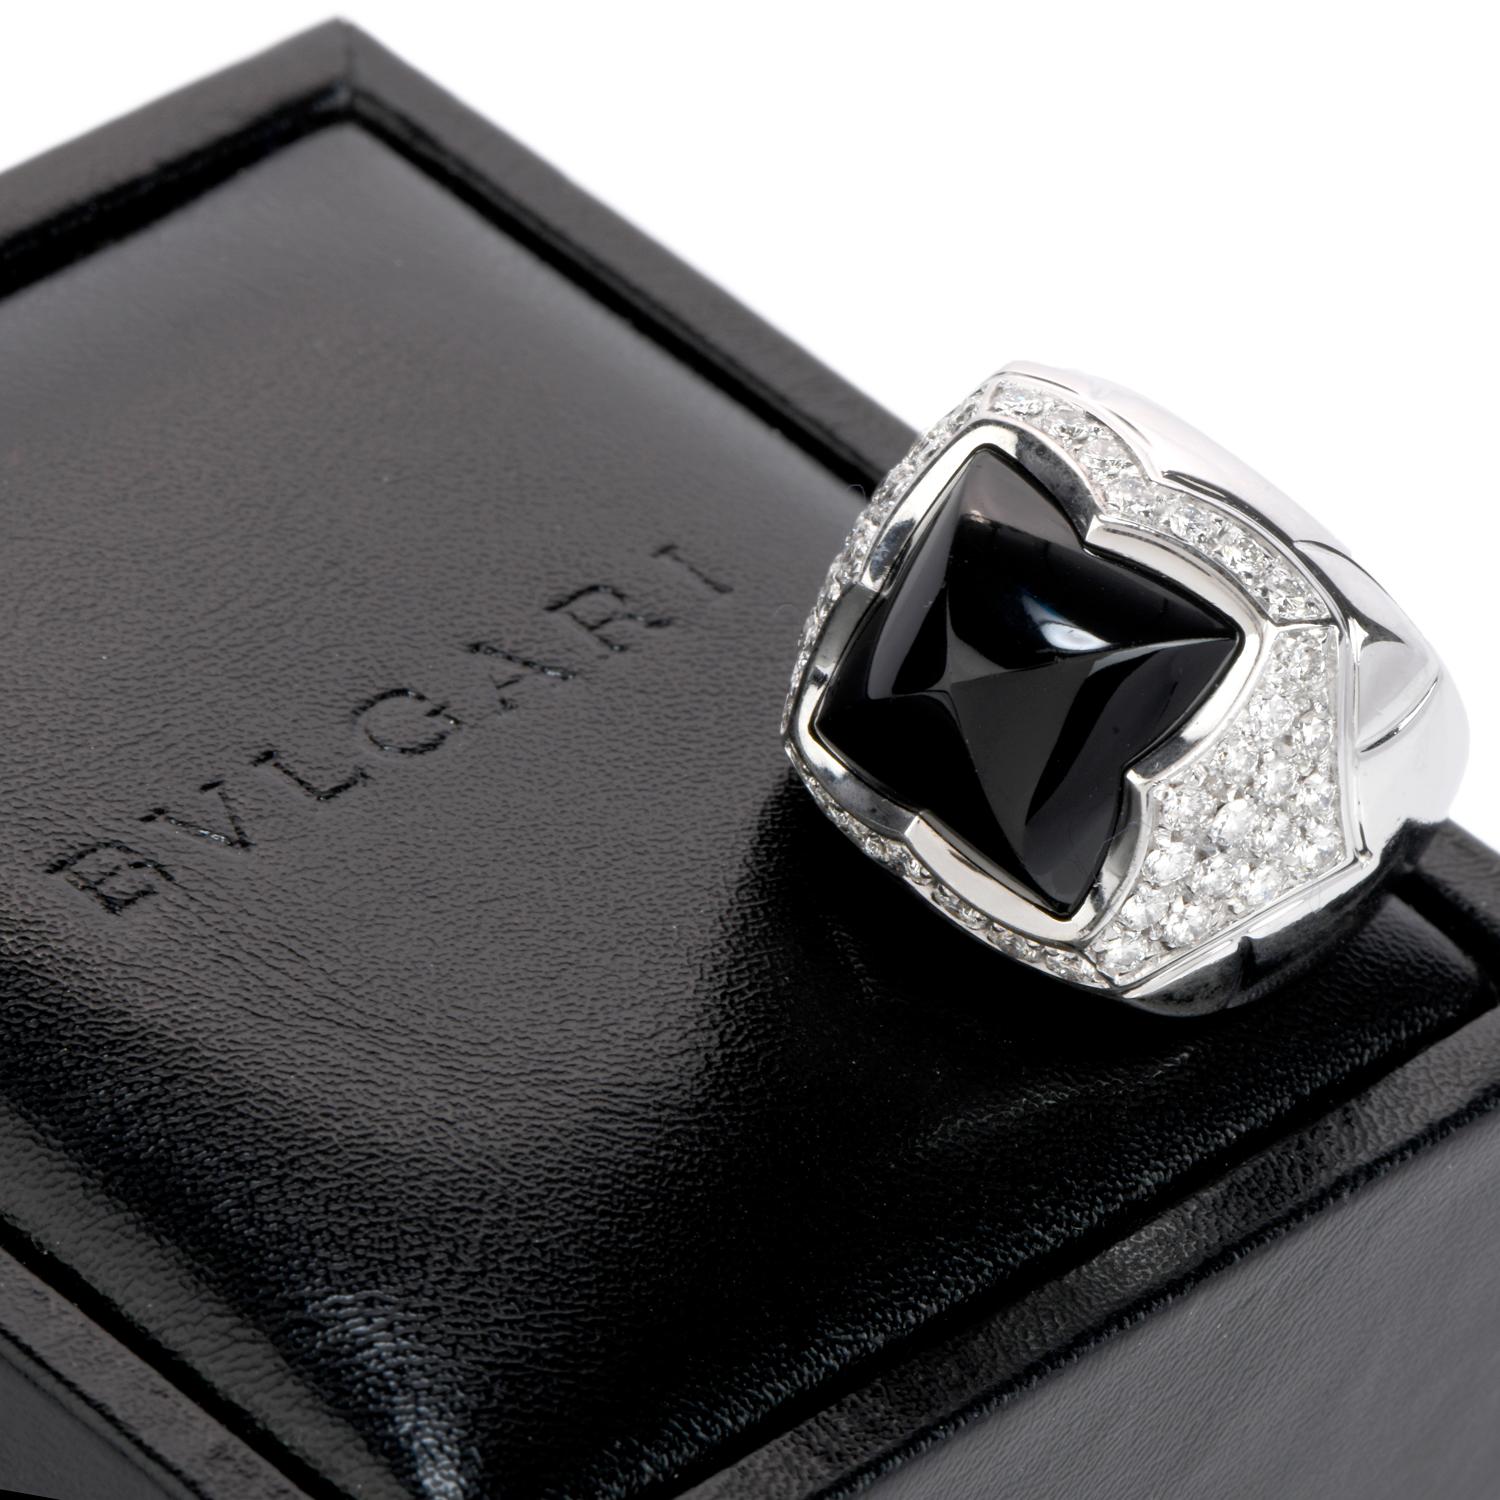 Marvel in delight at this fashionable Bvlgari Diamond Onyx 18K Gold Pyramid Cabochon Ring!  This designer ring is crafted

in 18 karat white gold and is purity marked.  There are approximately 46 genuine diamonds, round cut, pave set, totaling

1.35